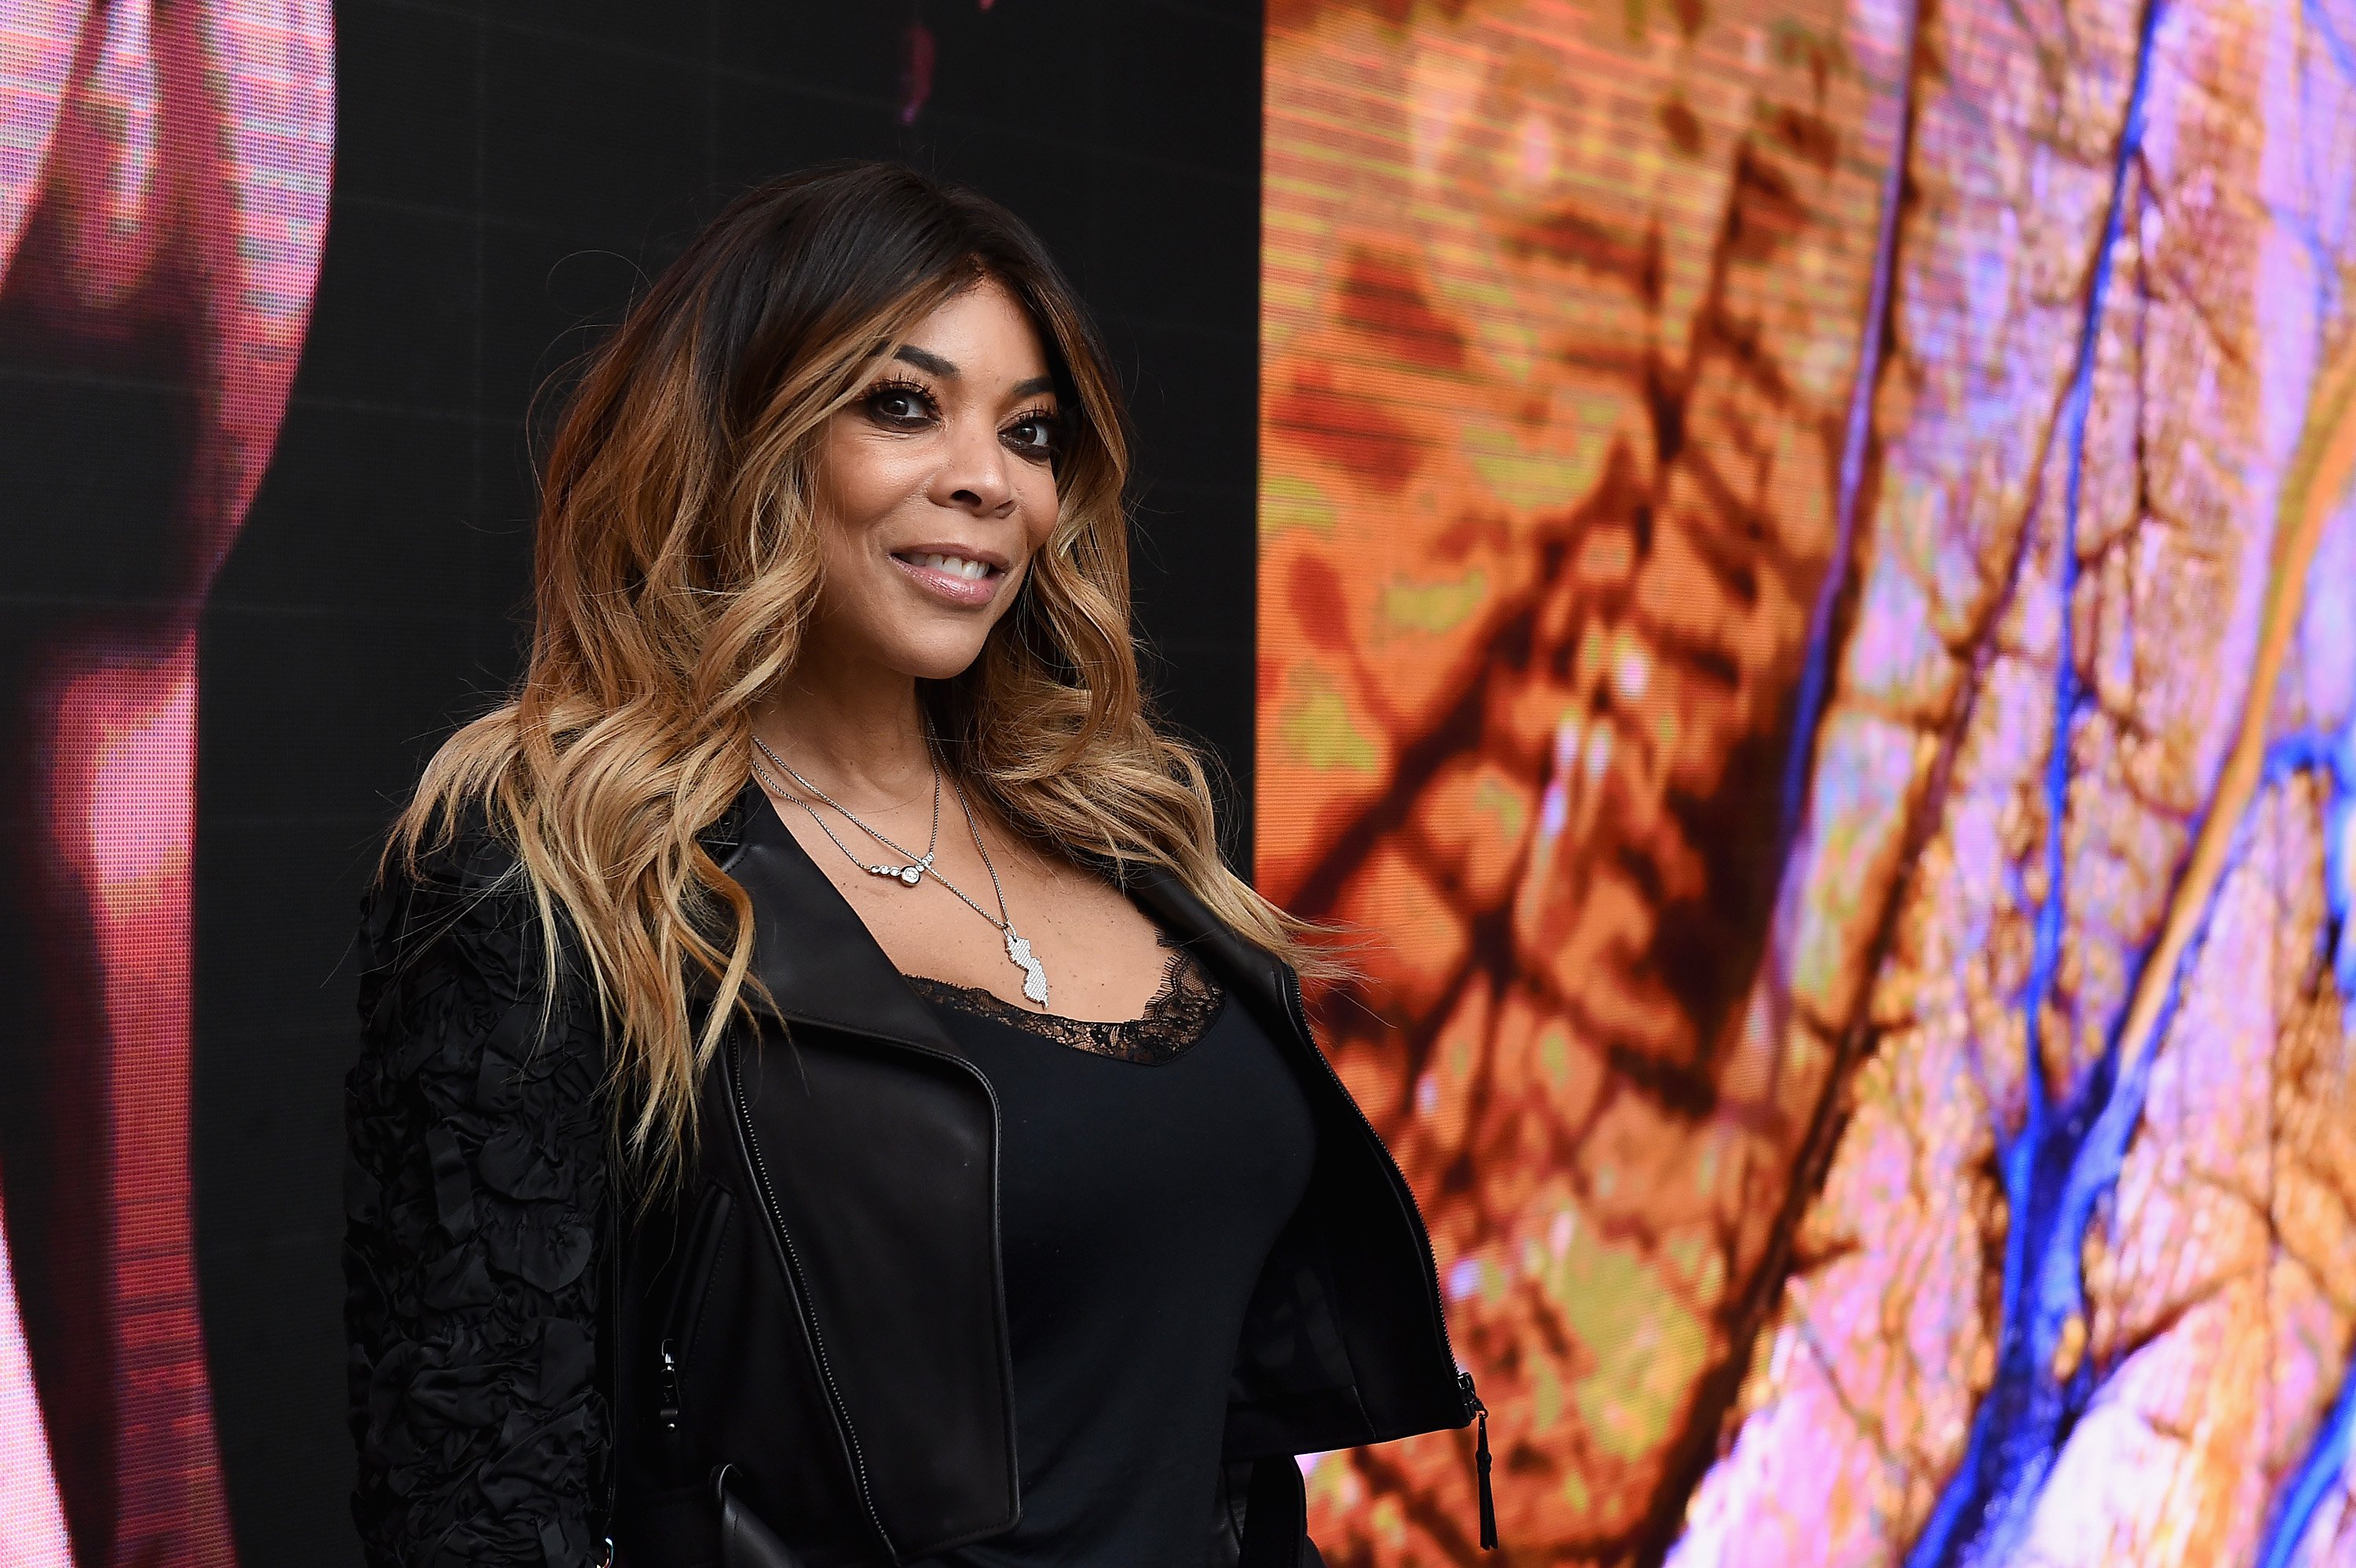 Wendy Williams poses at an event.